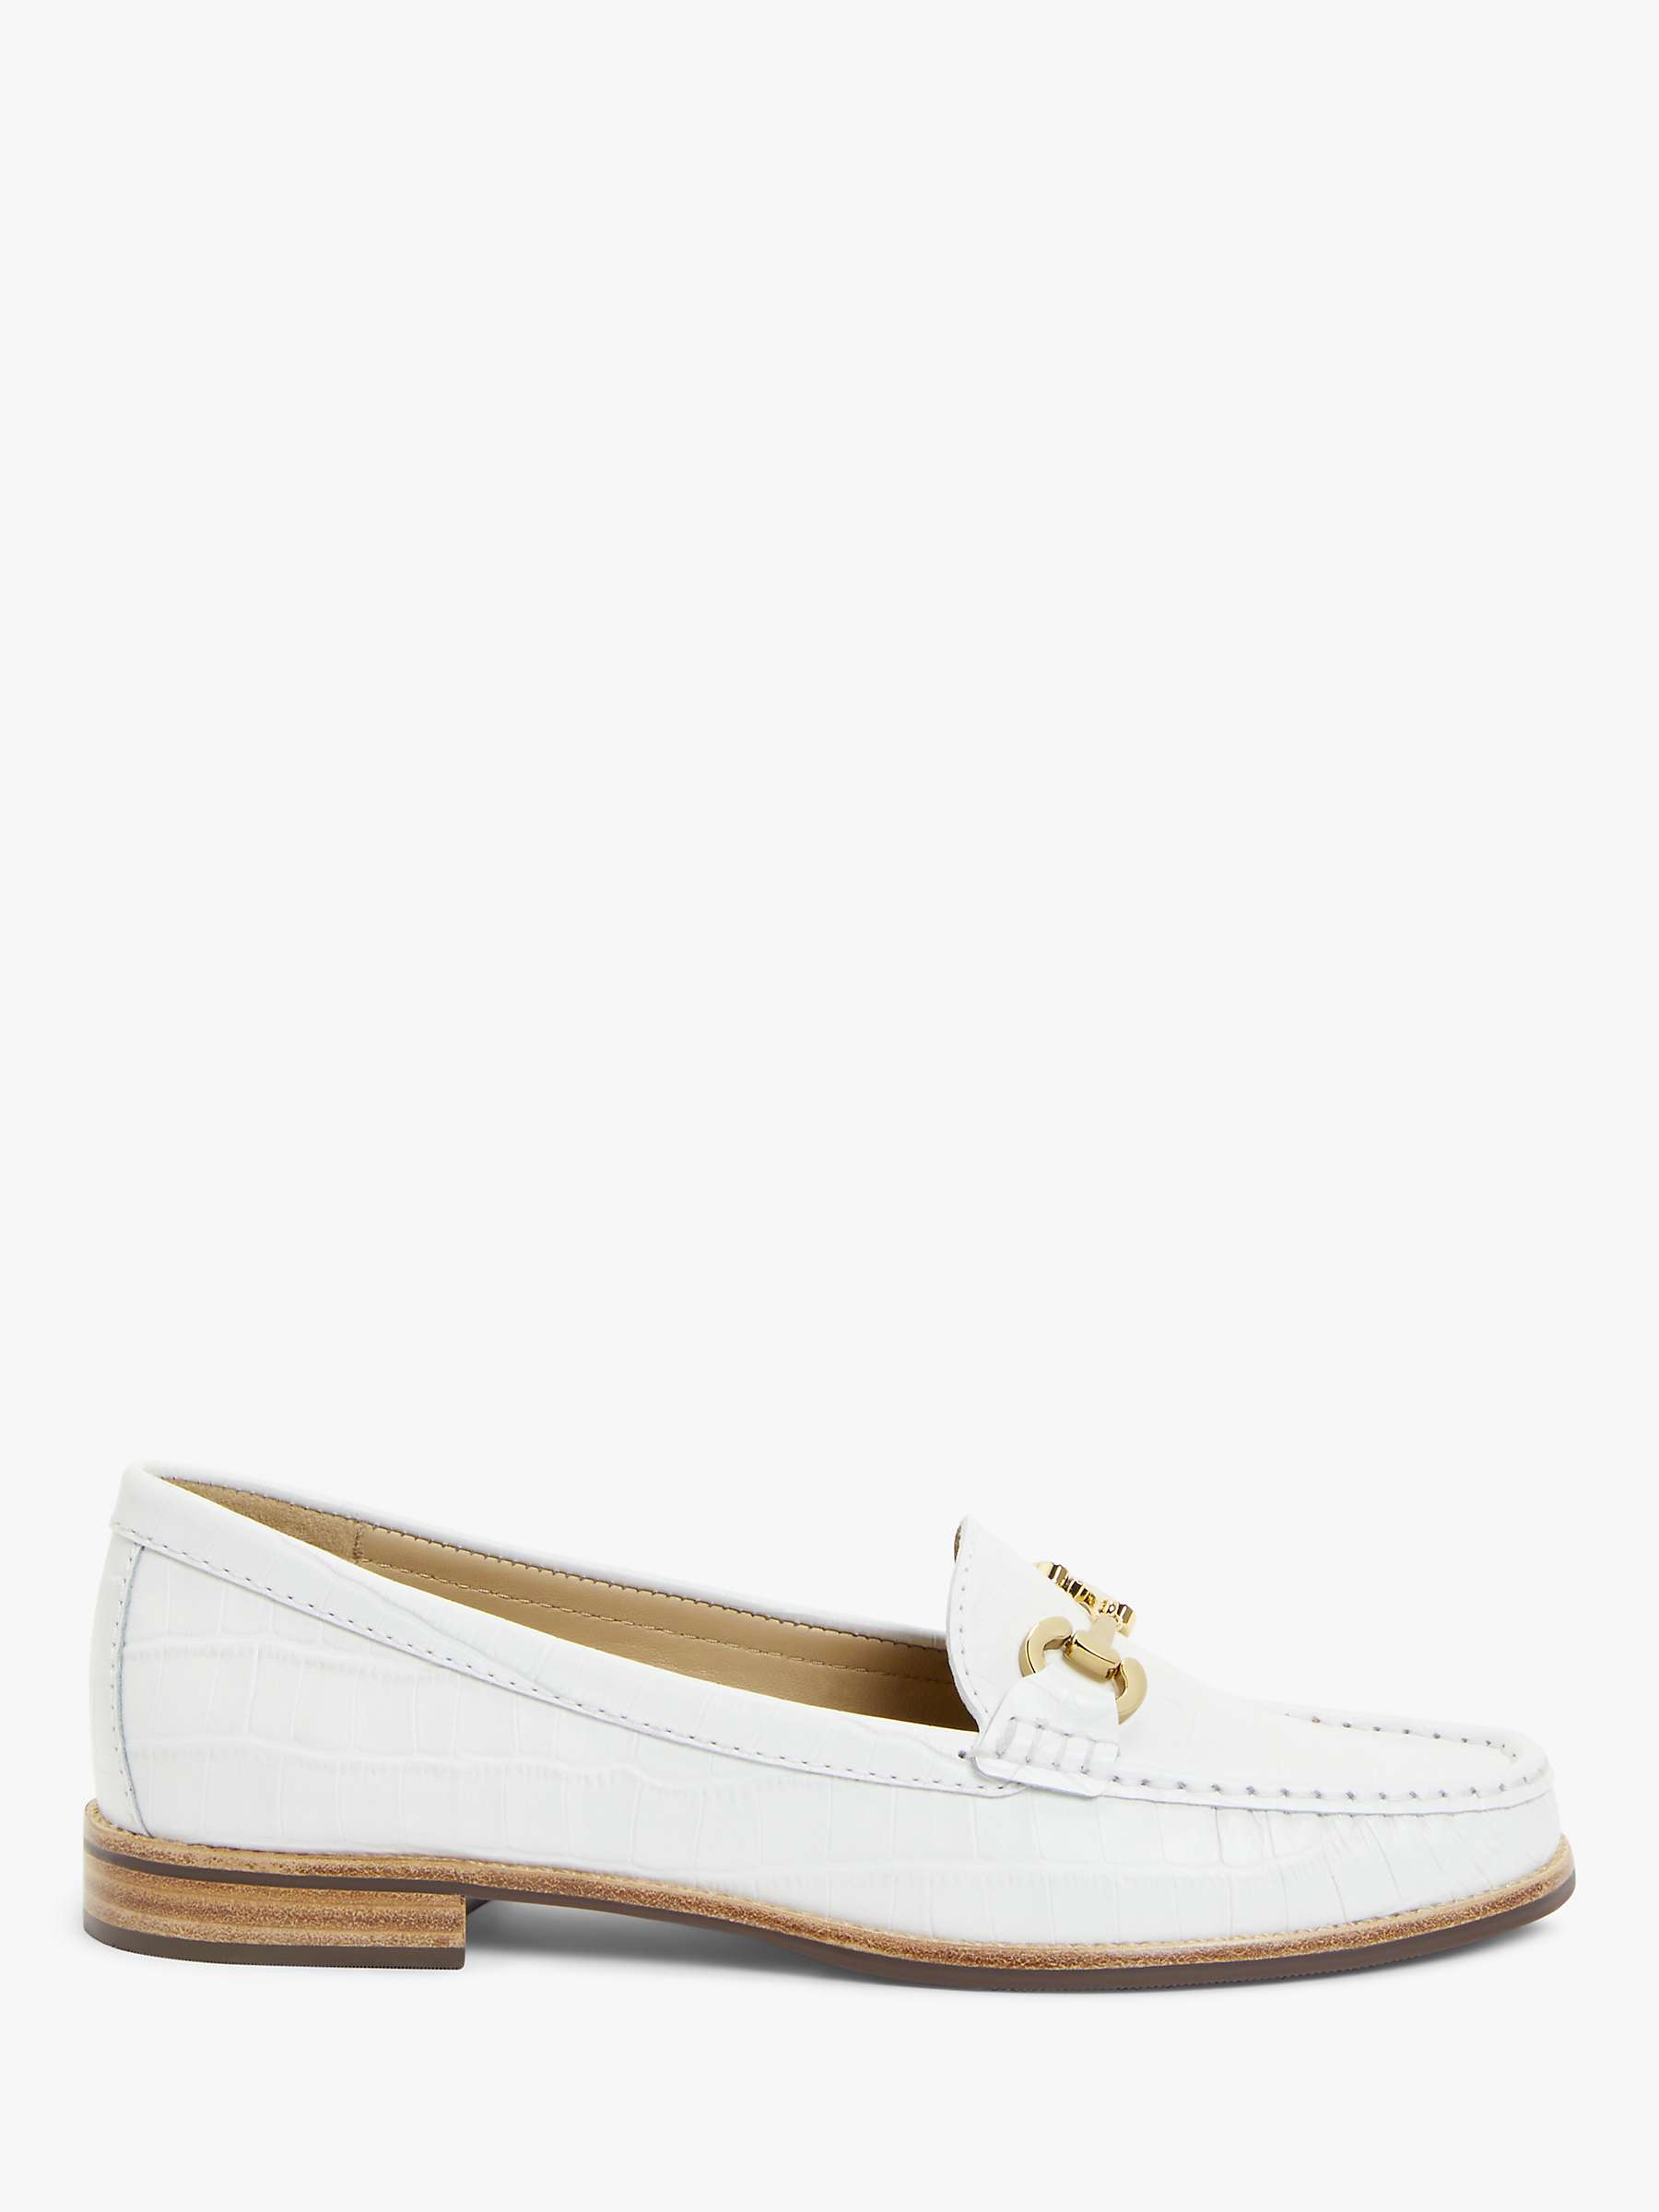 John Lewis August Leather Moccasins, White Croc at John Lewis & Partners